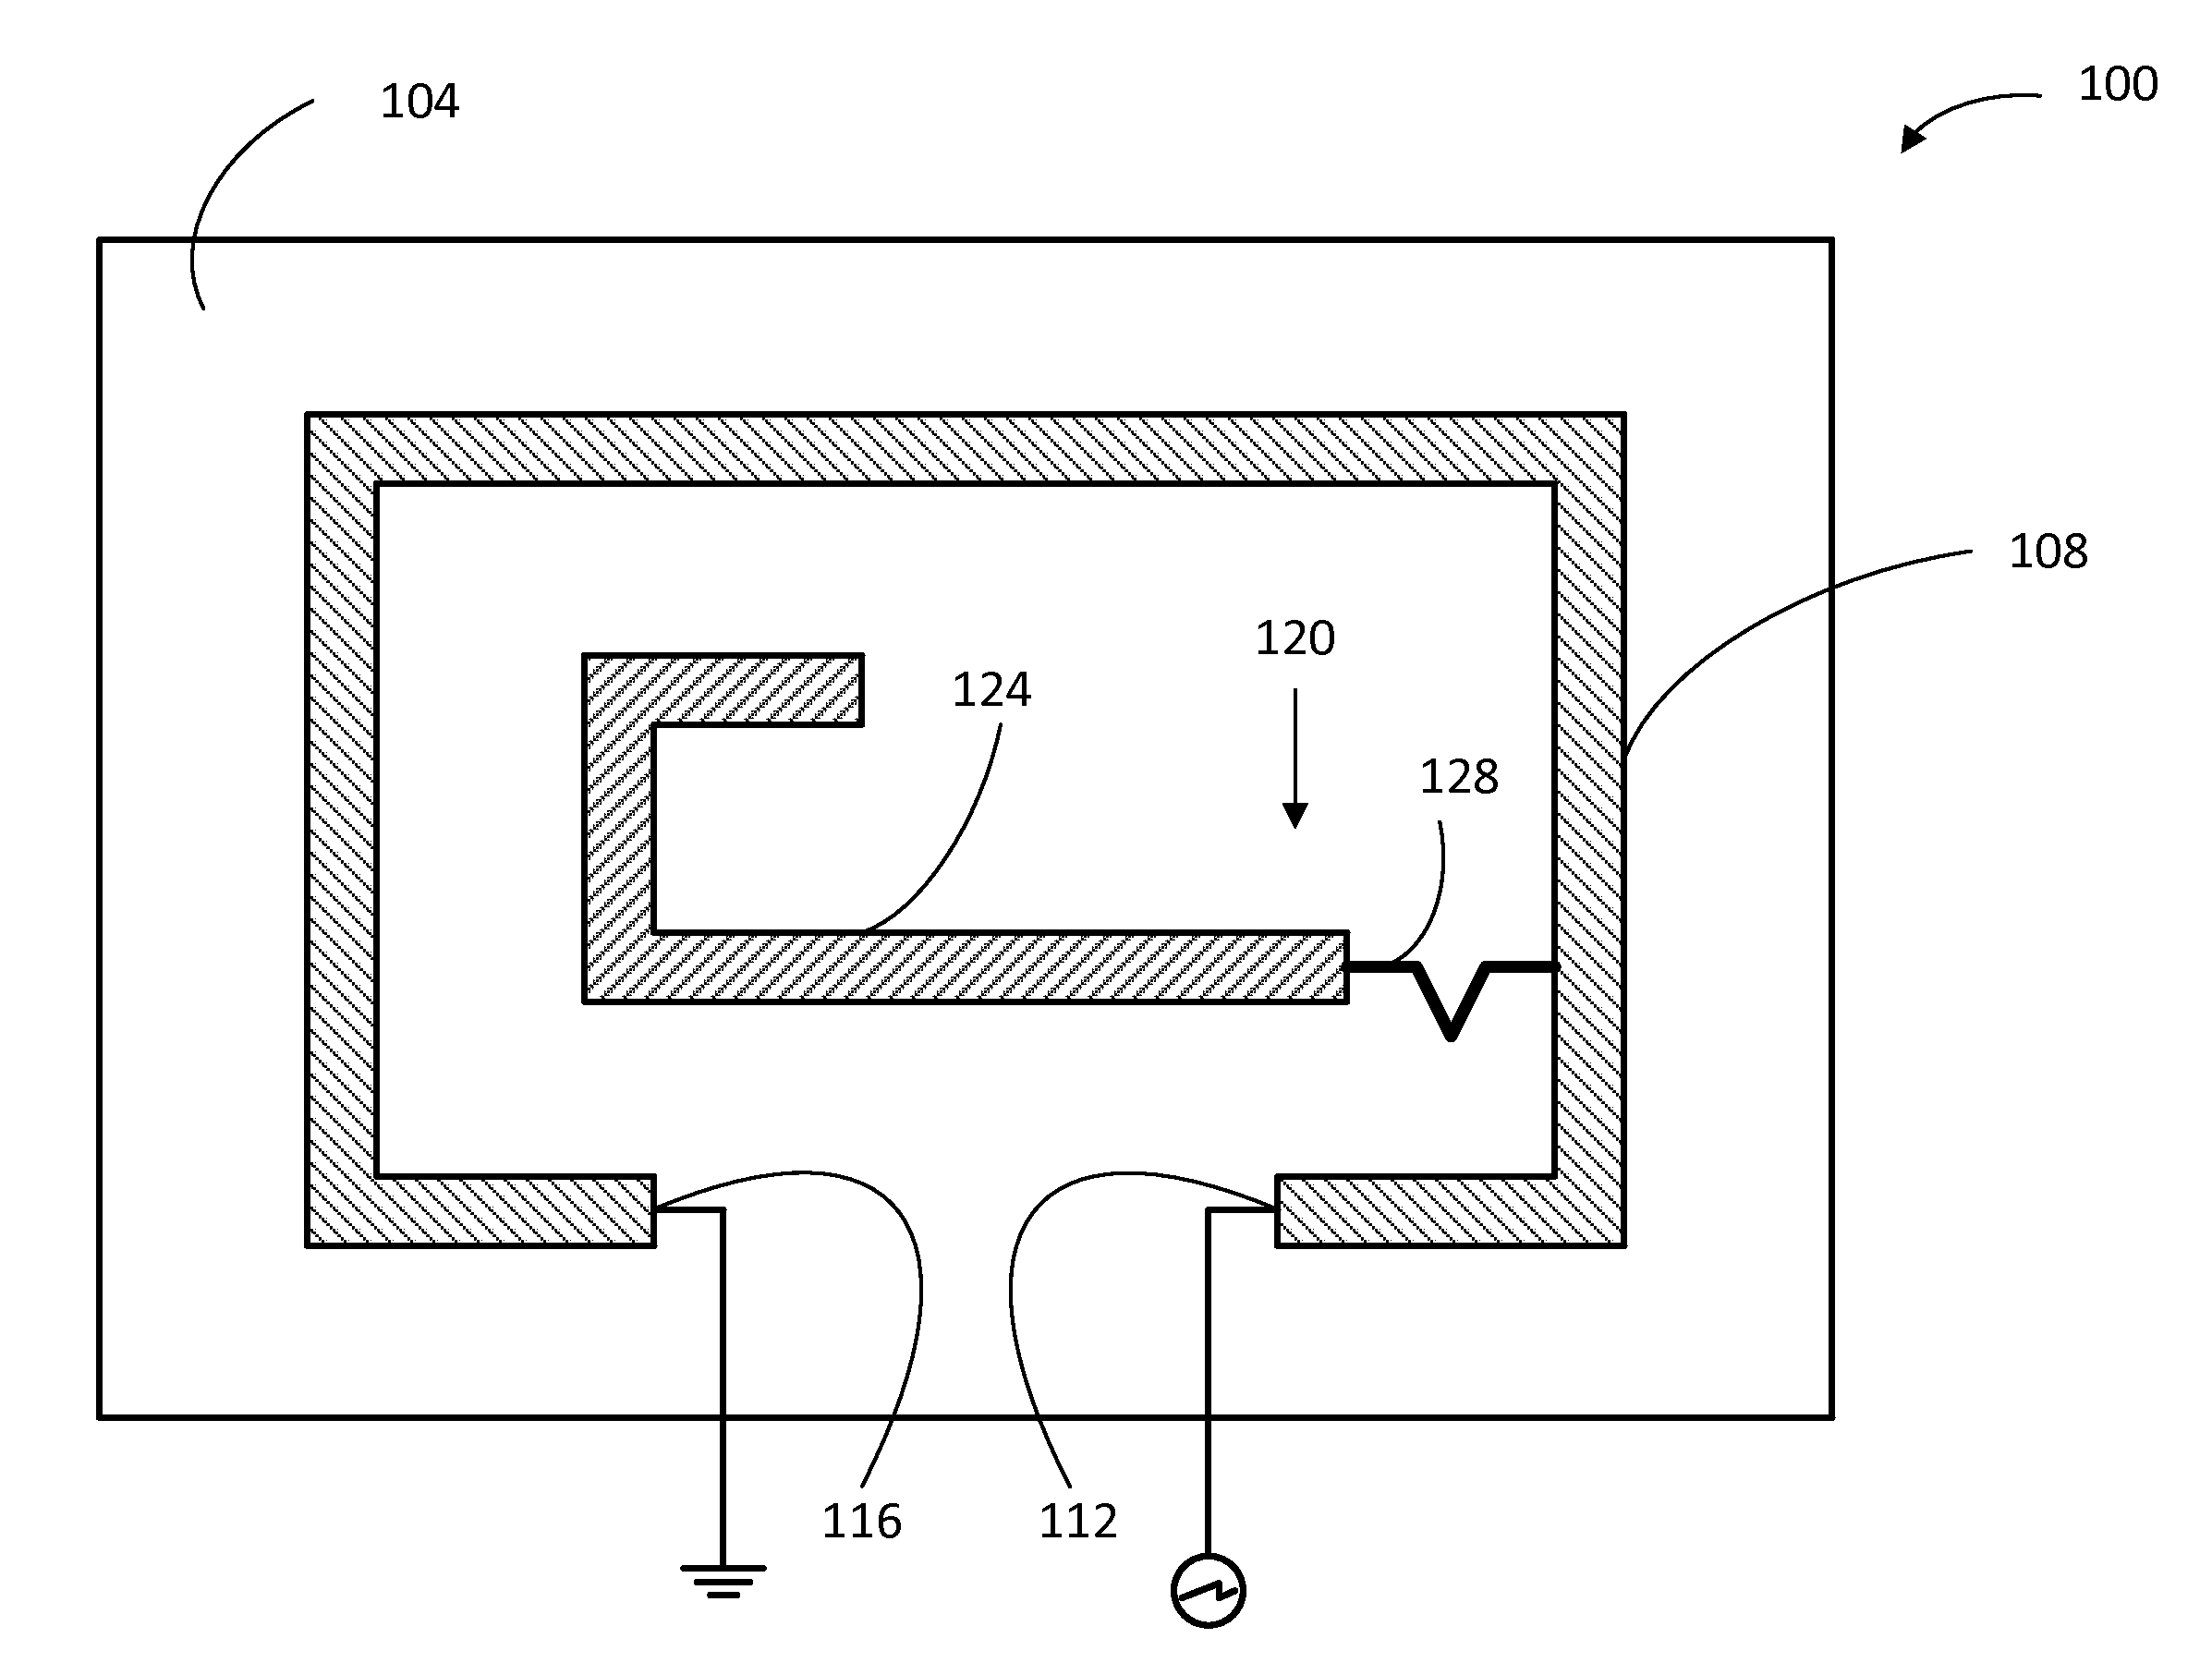 Antenna system using capacitively coupled compound loop antennas with antenna isolation provision